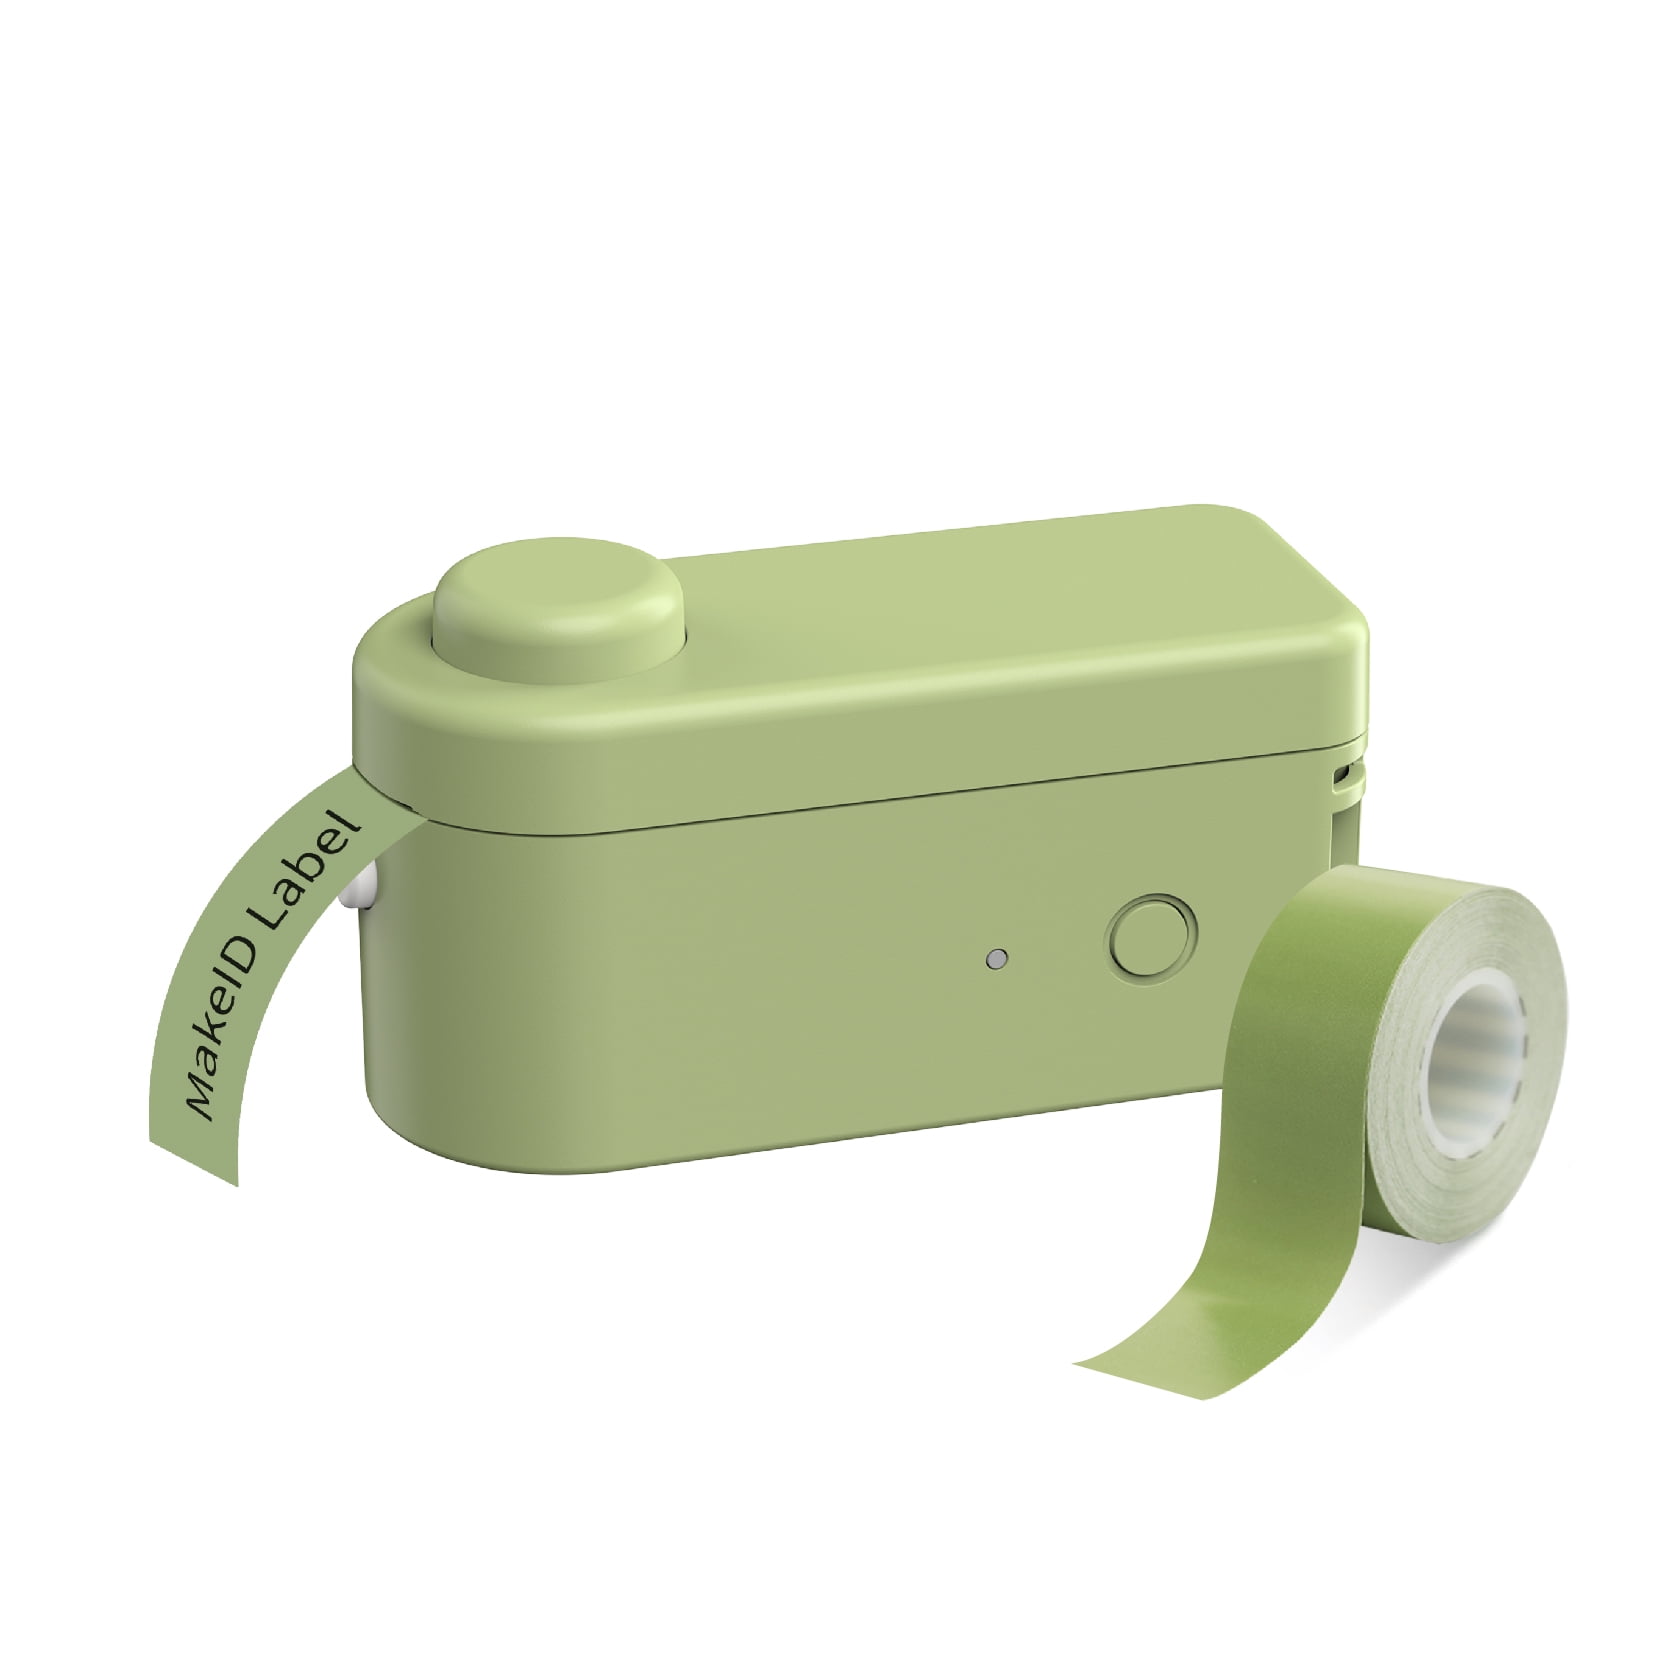 Miumaeov Label Printer, Portable Bluetooth Label Maker Machine with 1 Roll Tape for Office Home, Green, Size: One Size